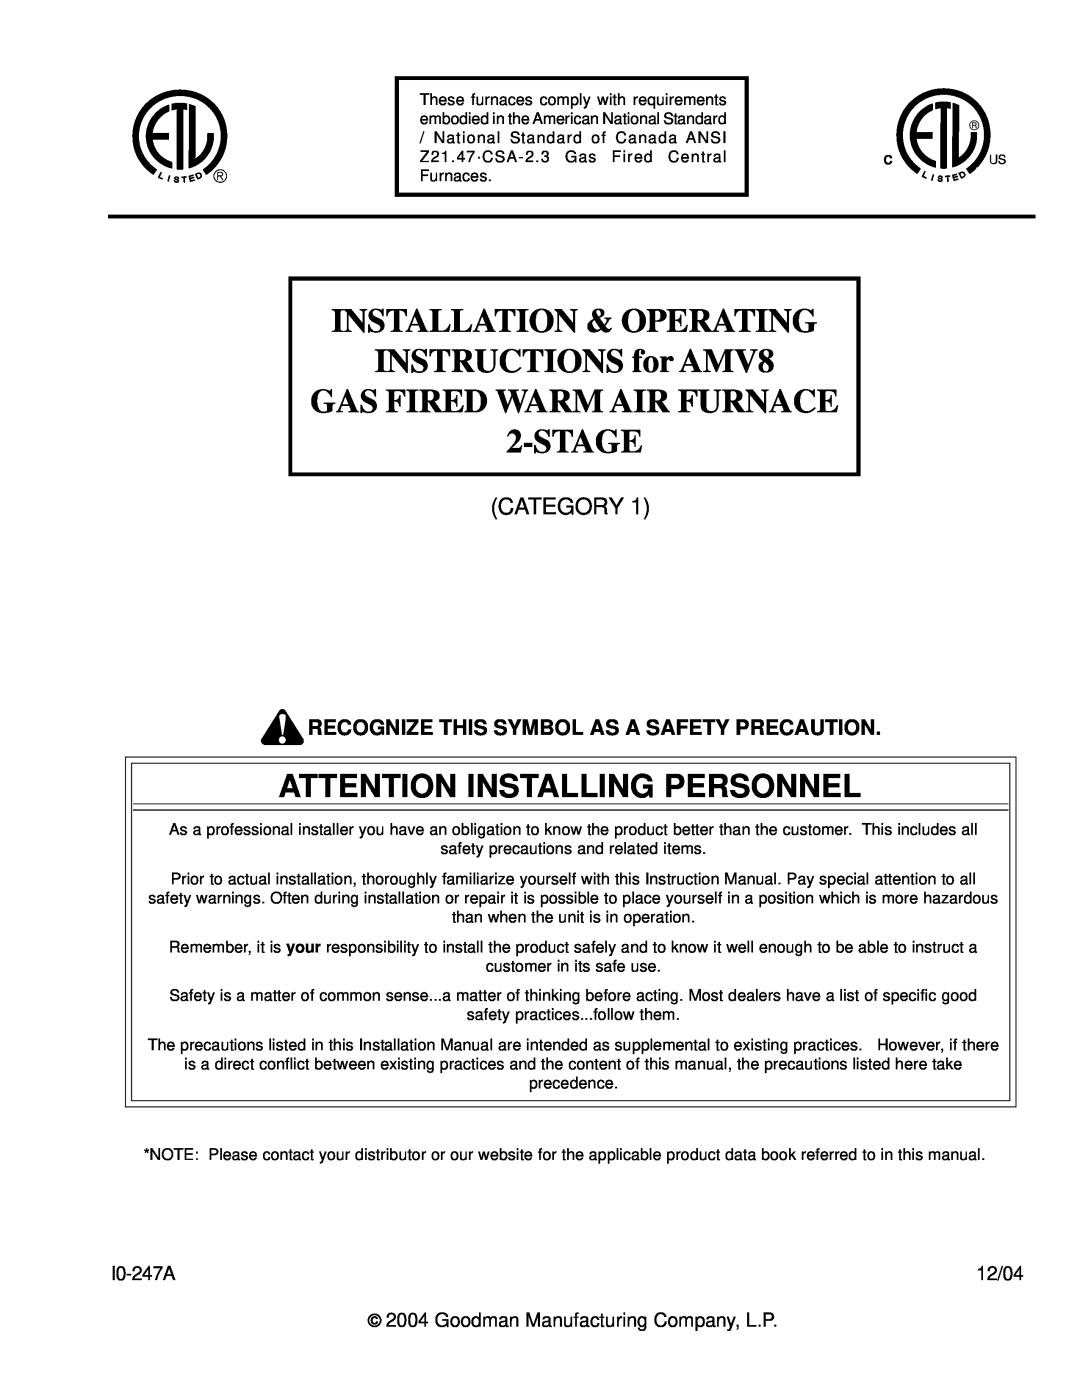 Goodman Mfg AMV8 instruction manual Attention Installing Personnel, Recognize This Symbol As A Safety Precaution, I0-247A 